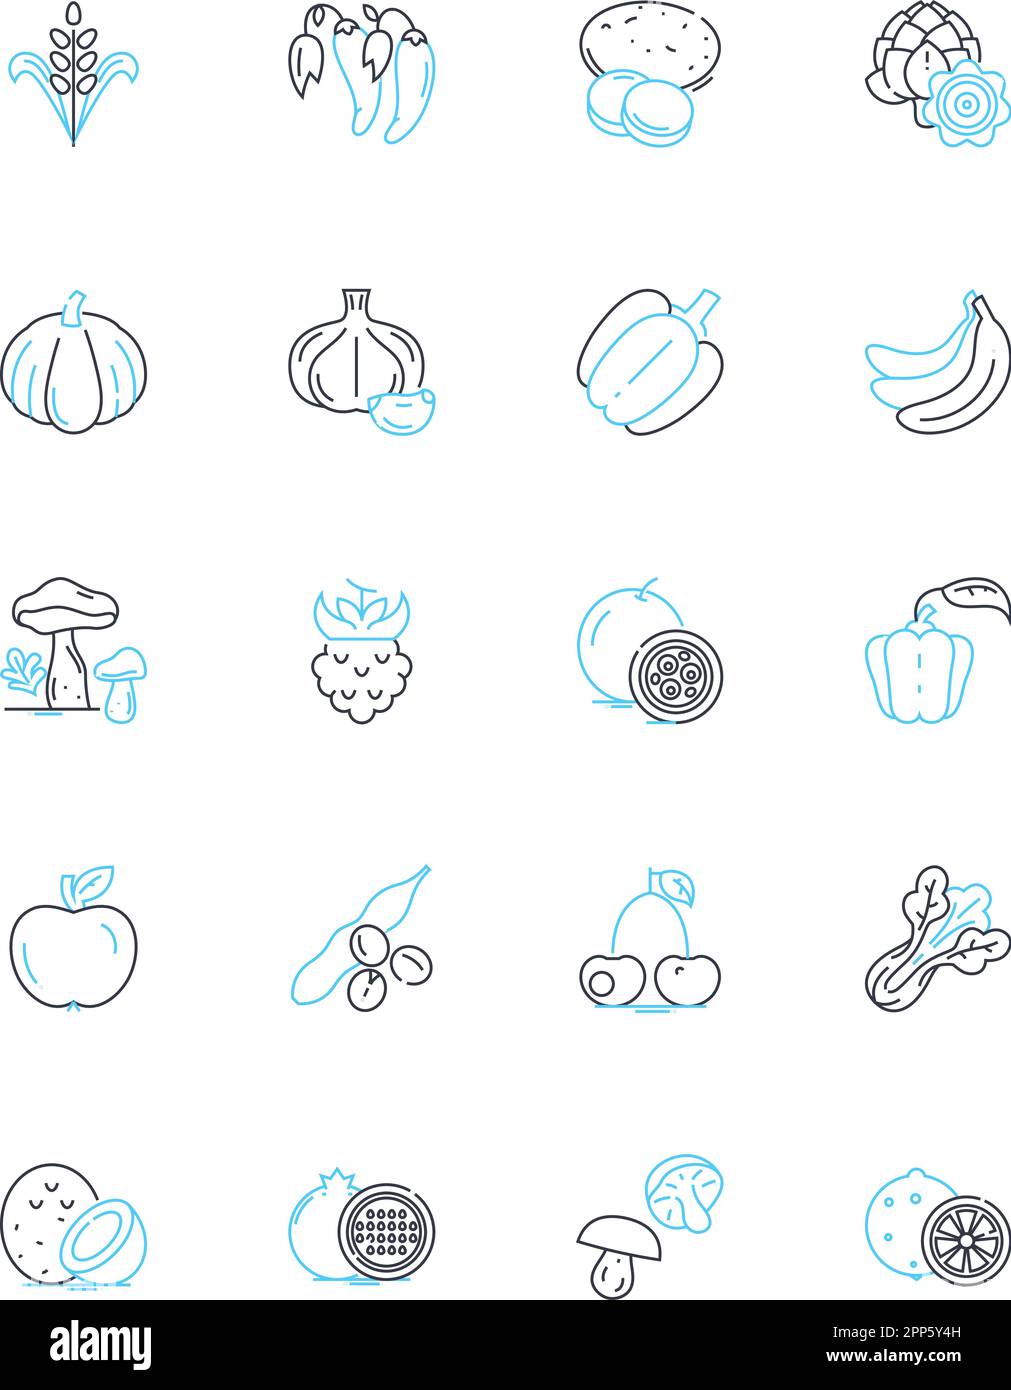 Grocery store linear icons set. Food, Produce, Meat, Dairy, Bakery ...